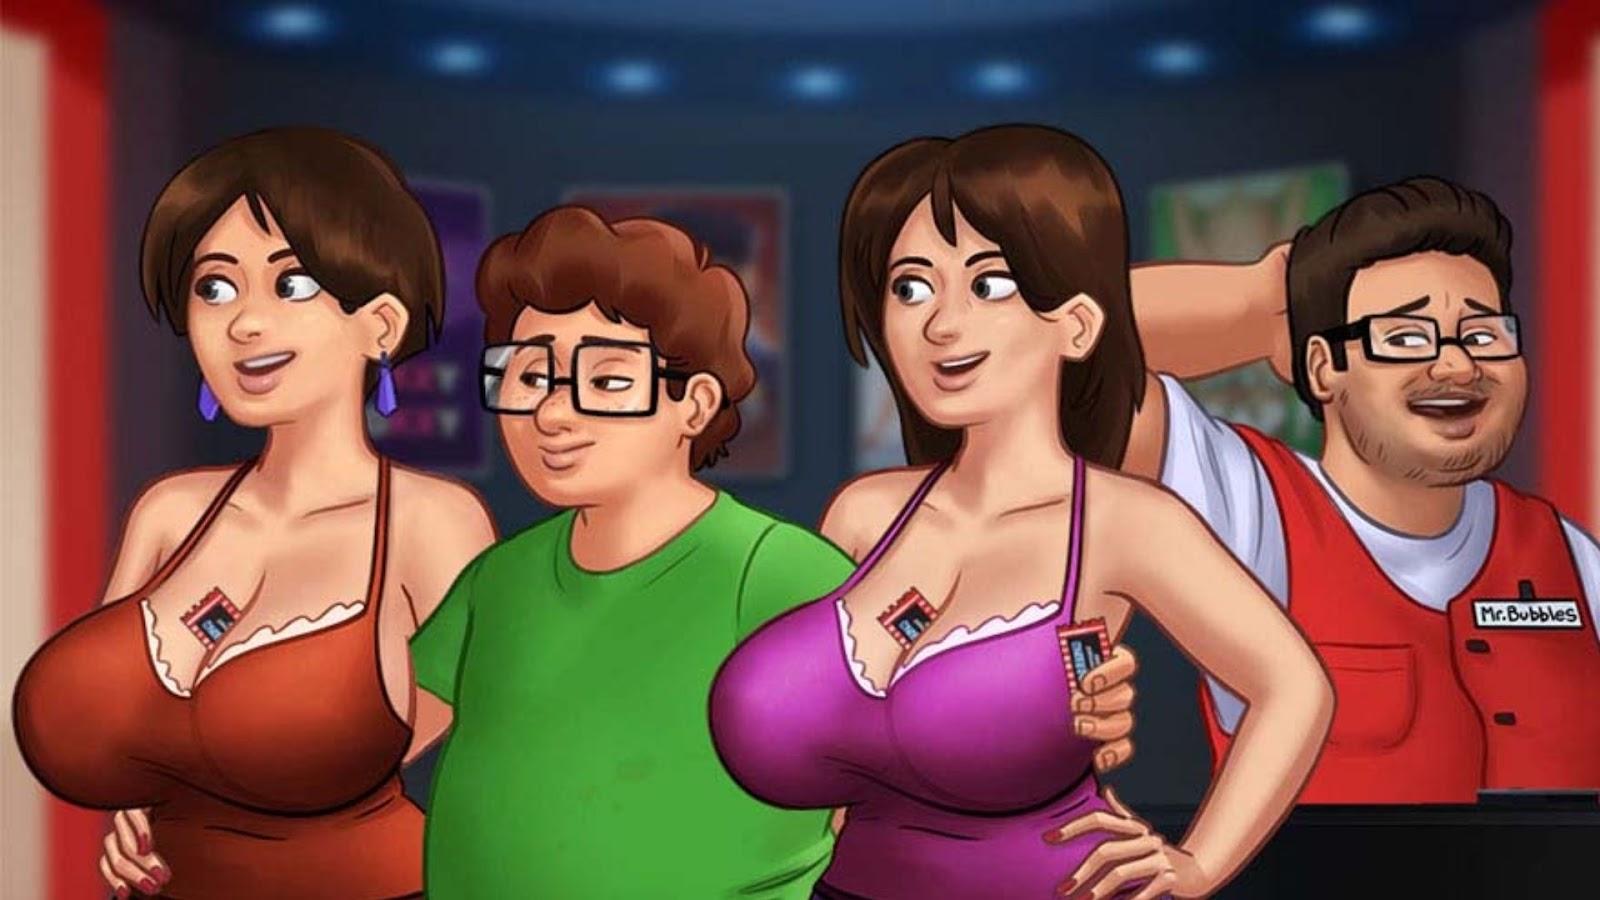 Adult Animated Games - Top Porn Games with Best Gameplay Scenes for Adults-LDPlayer's  Choice-LDPlayer